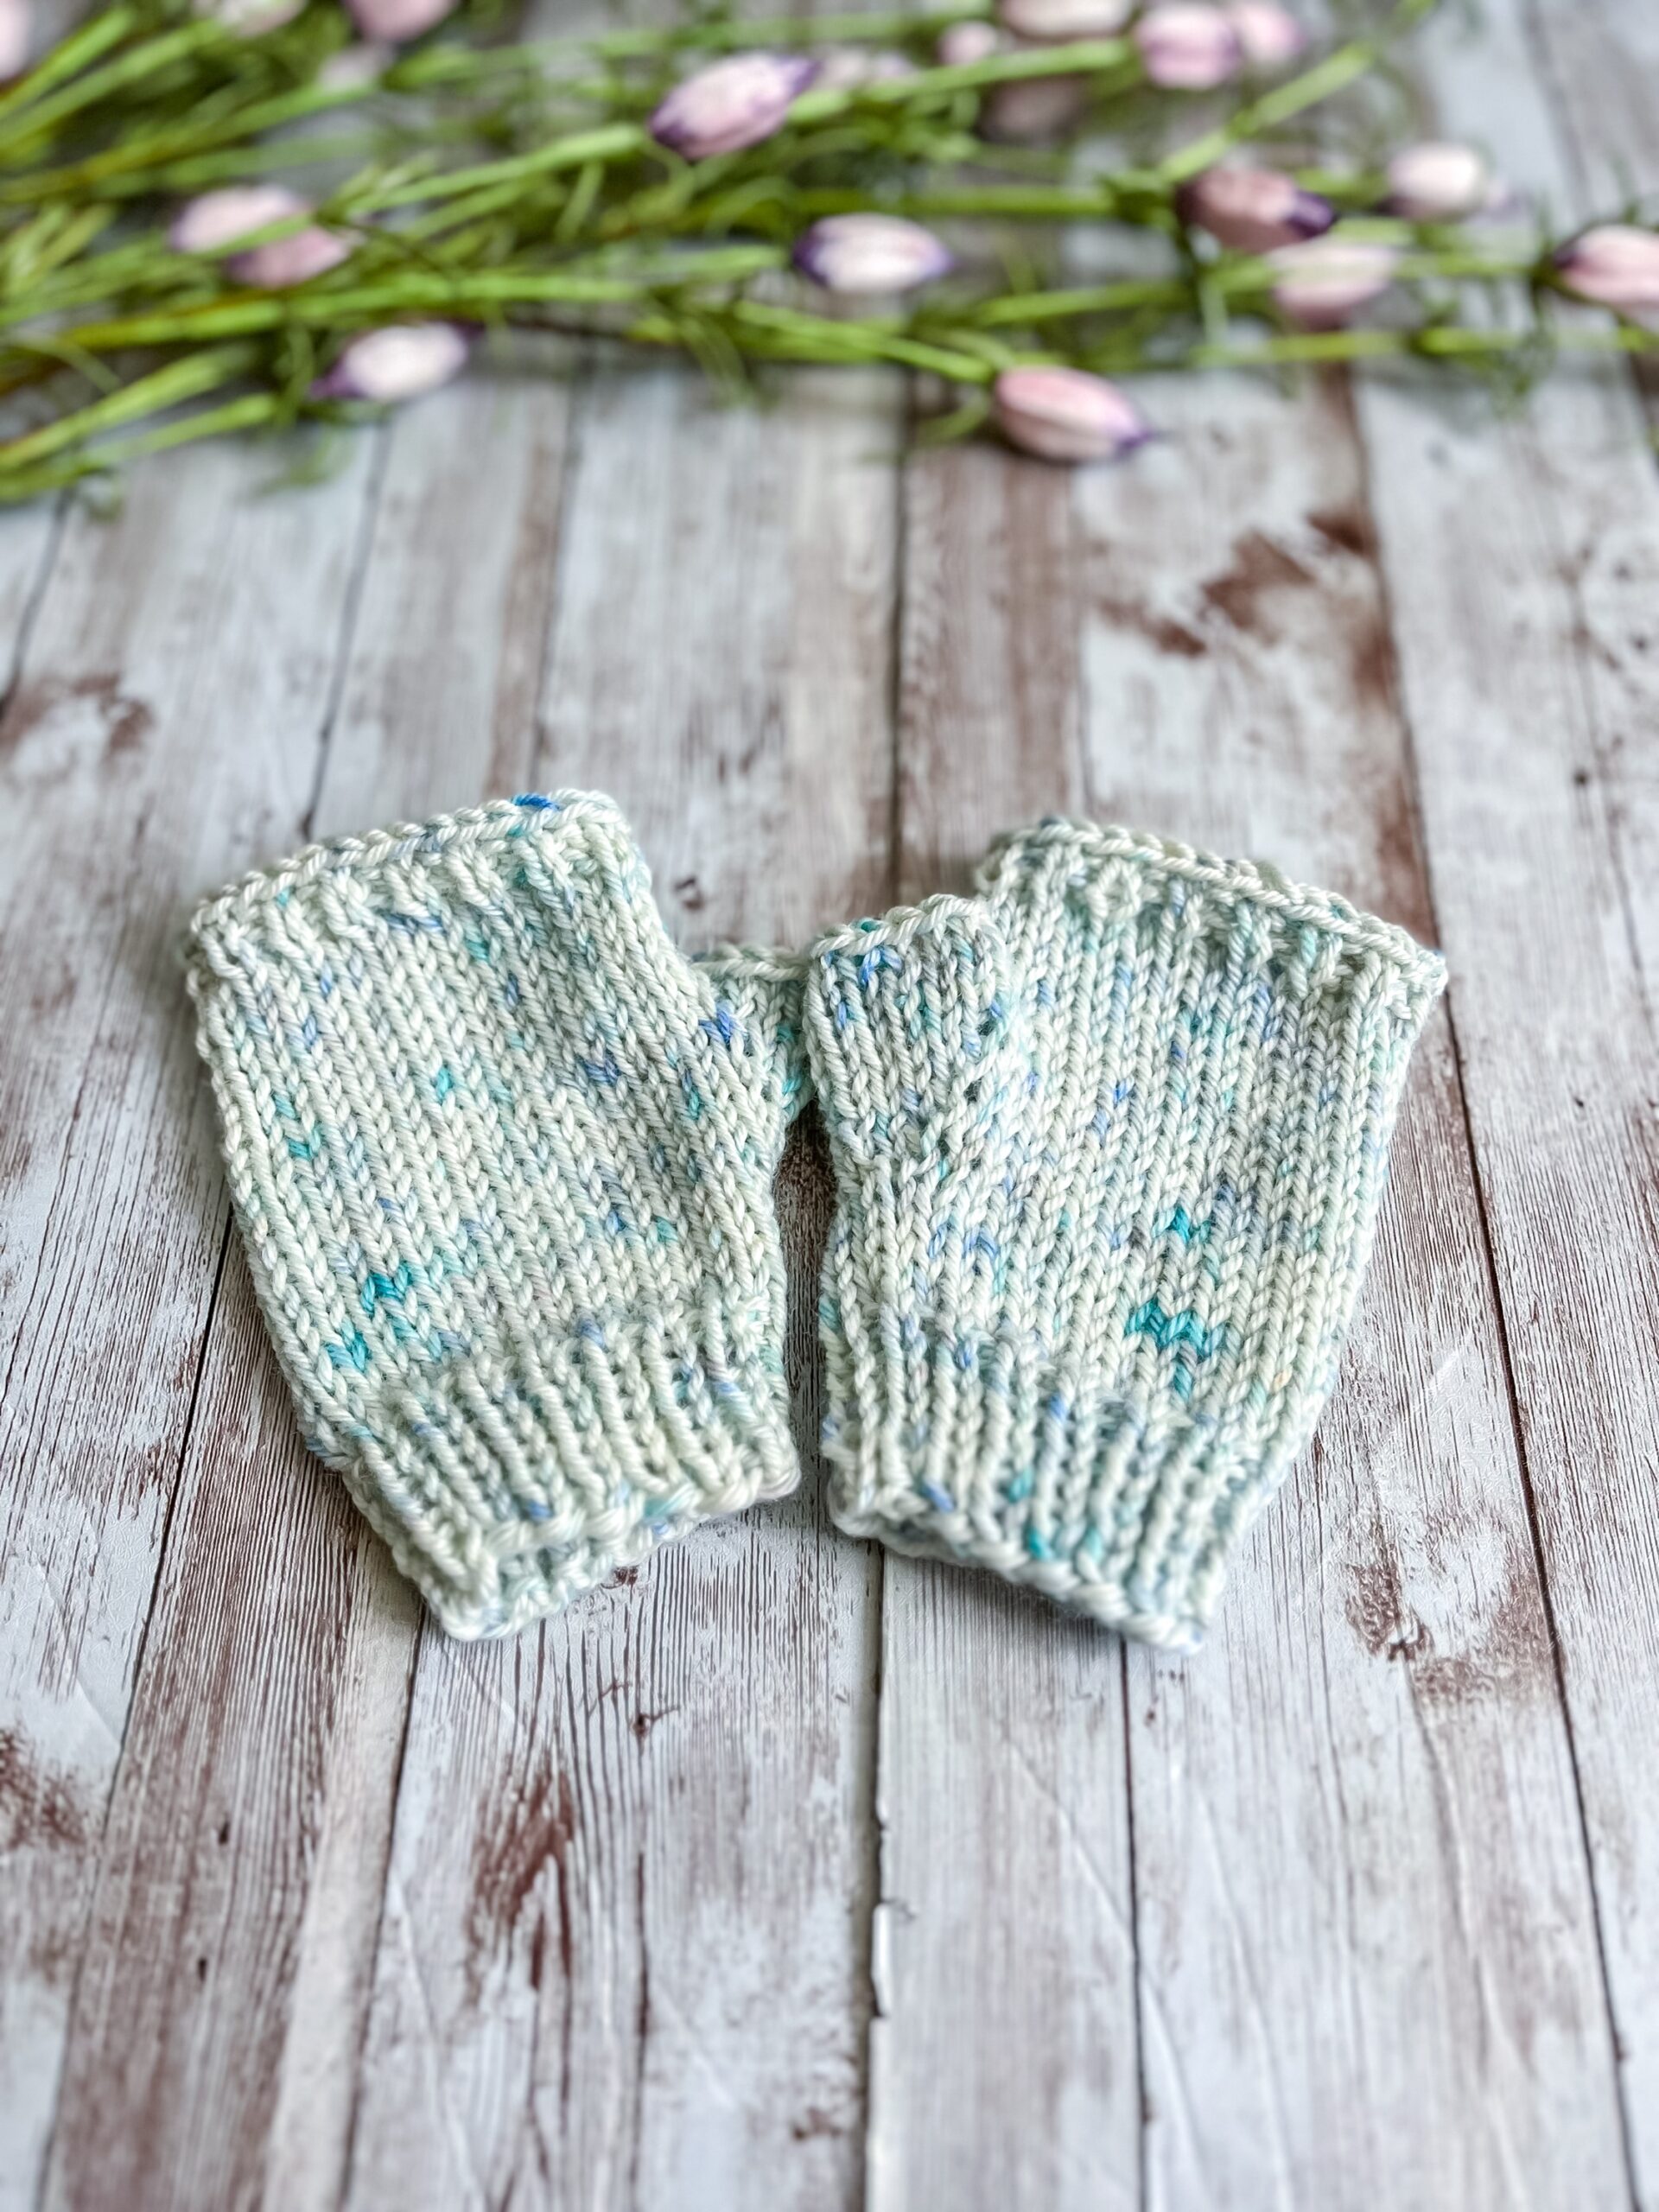 A pair of kid's sized pale blue speckled fingerless mitts are displayed on a wood plank with flower buds in the background